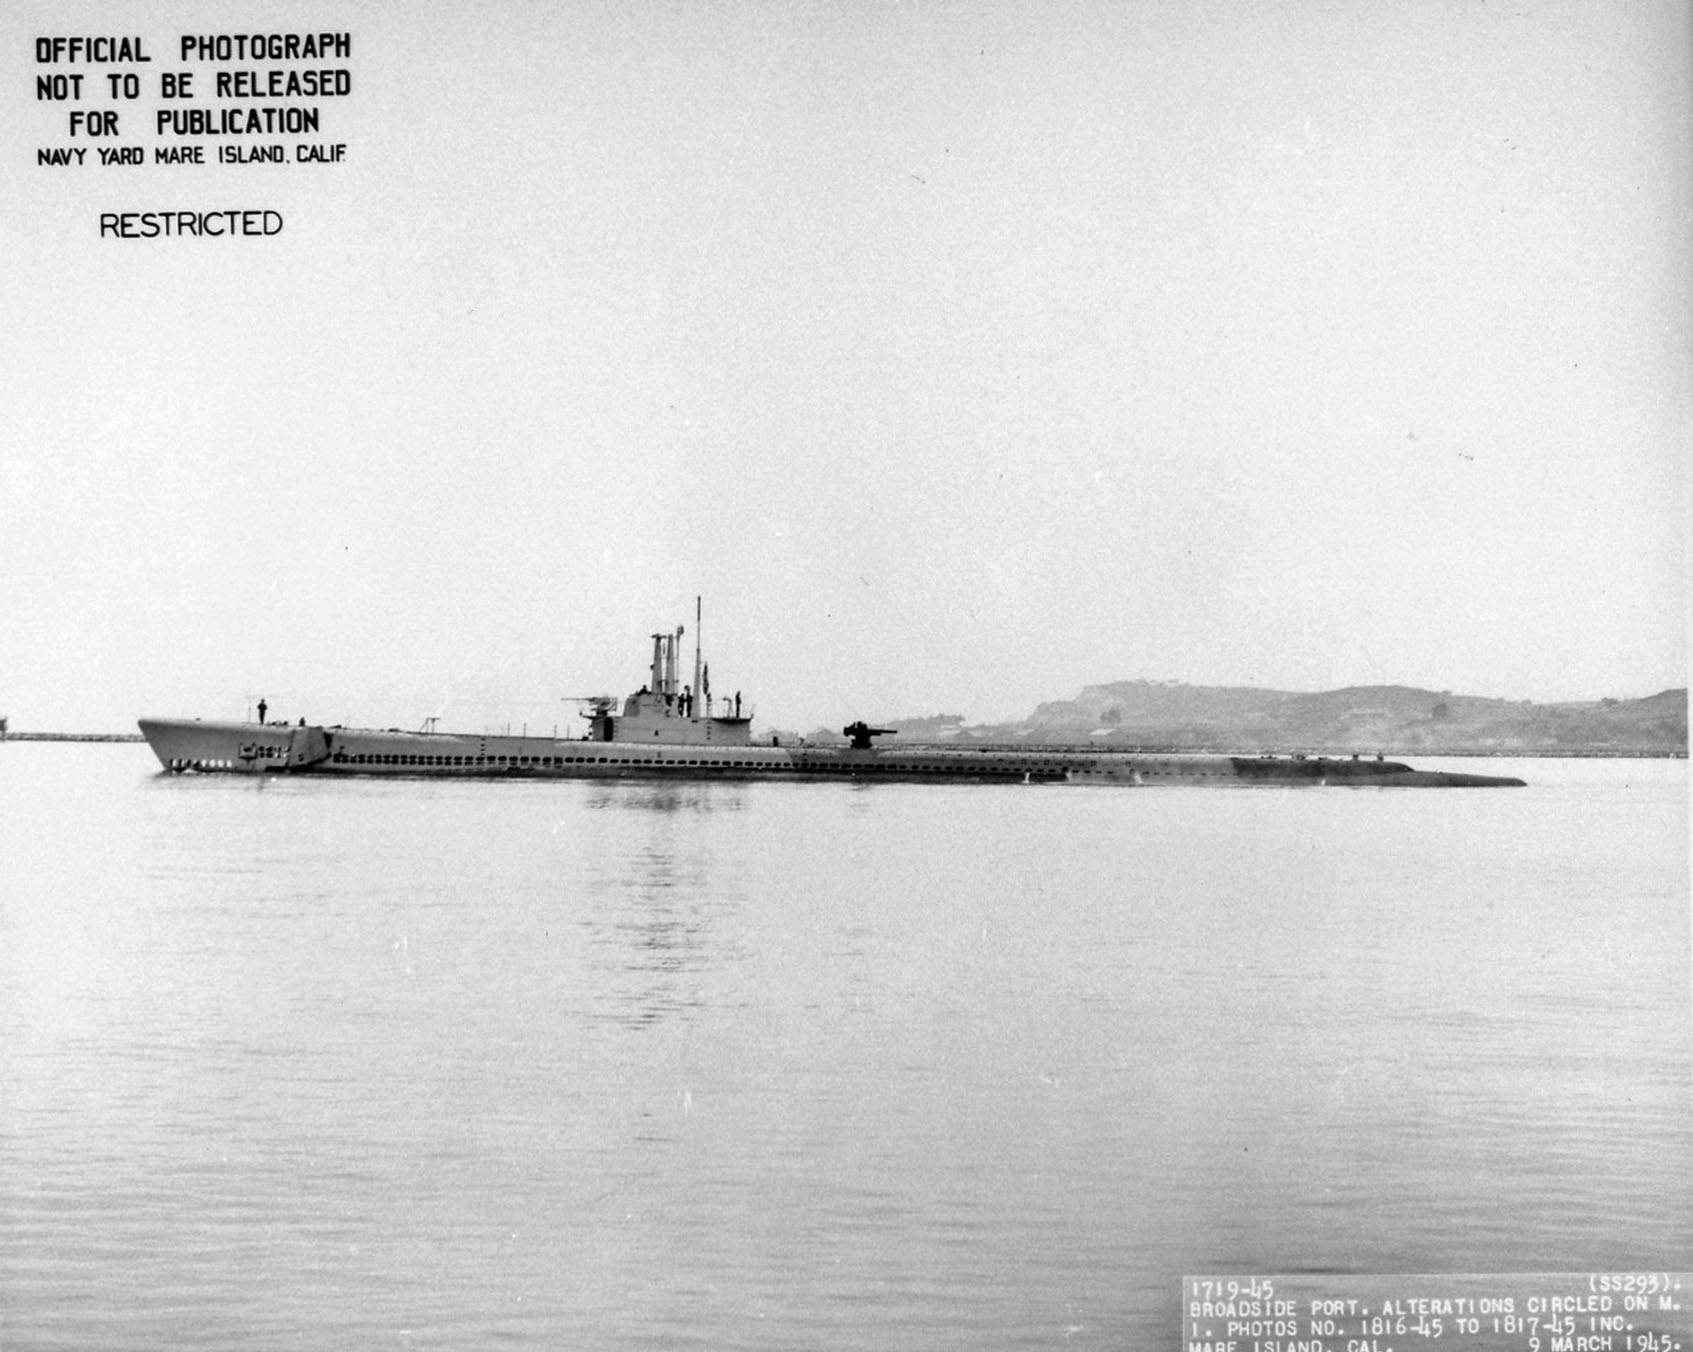 USS Dragonet off Mare Island Naval Shipyard, Vallejo, California, United States, 9 March 1945, photo 1 of 2